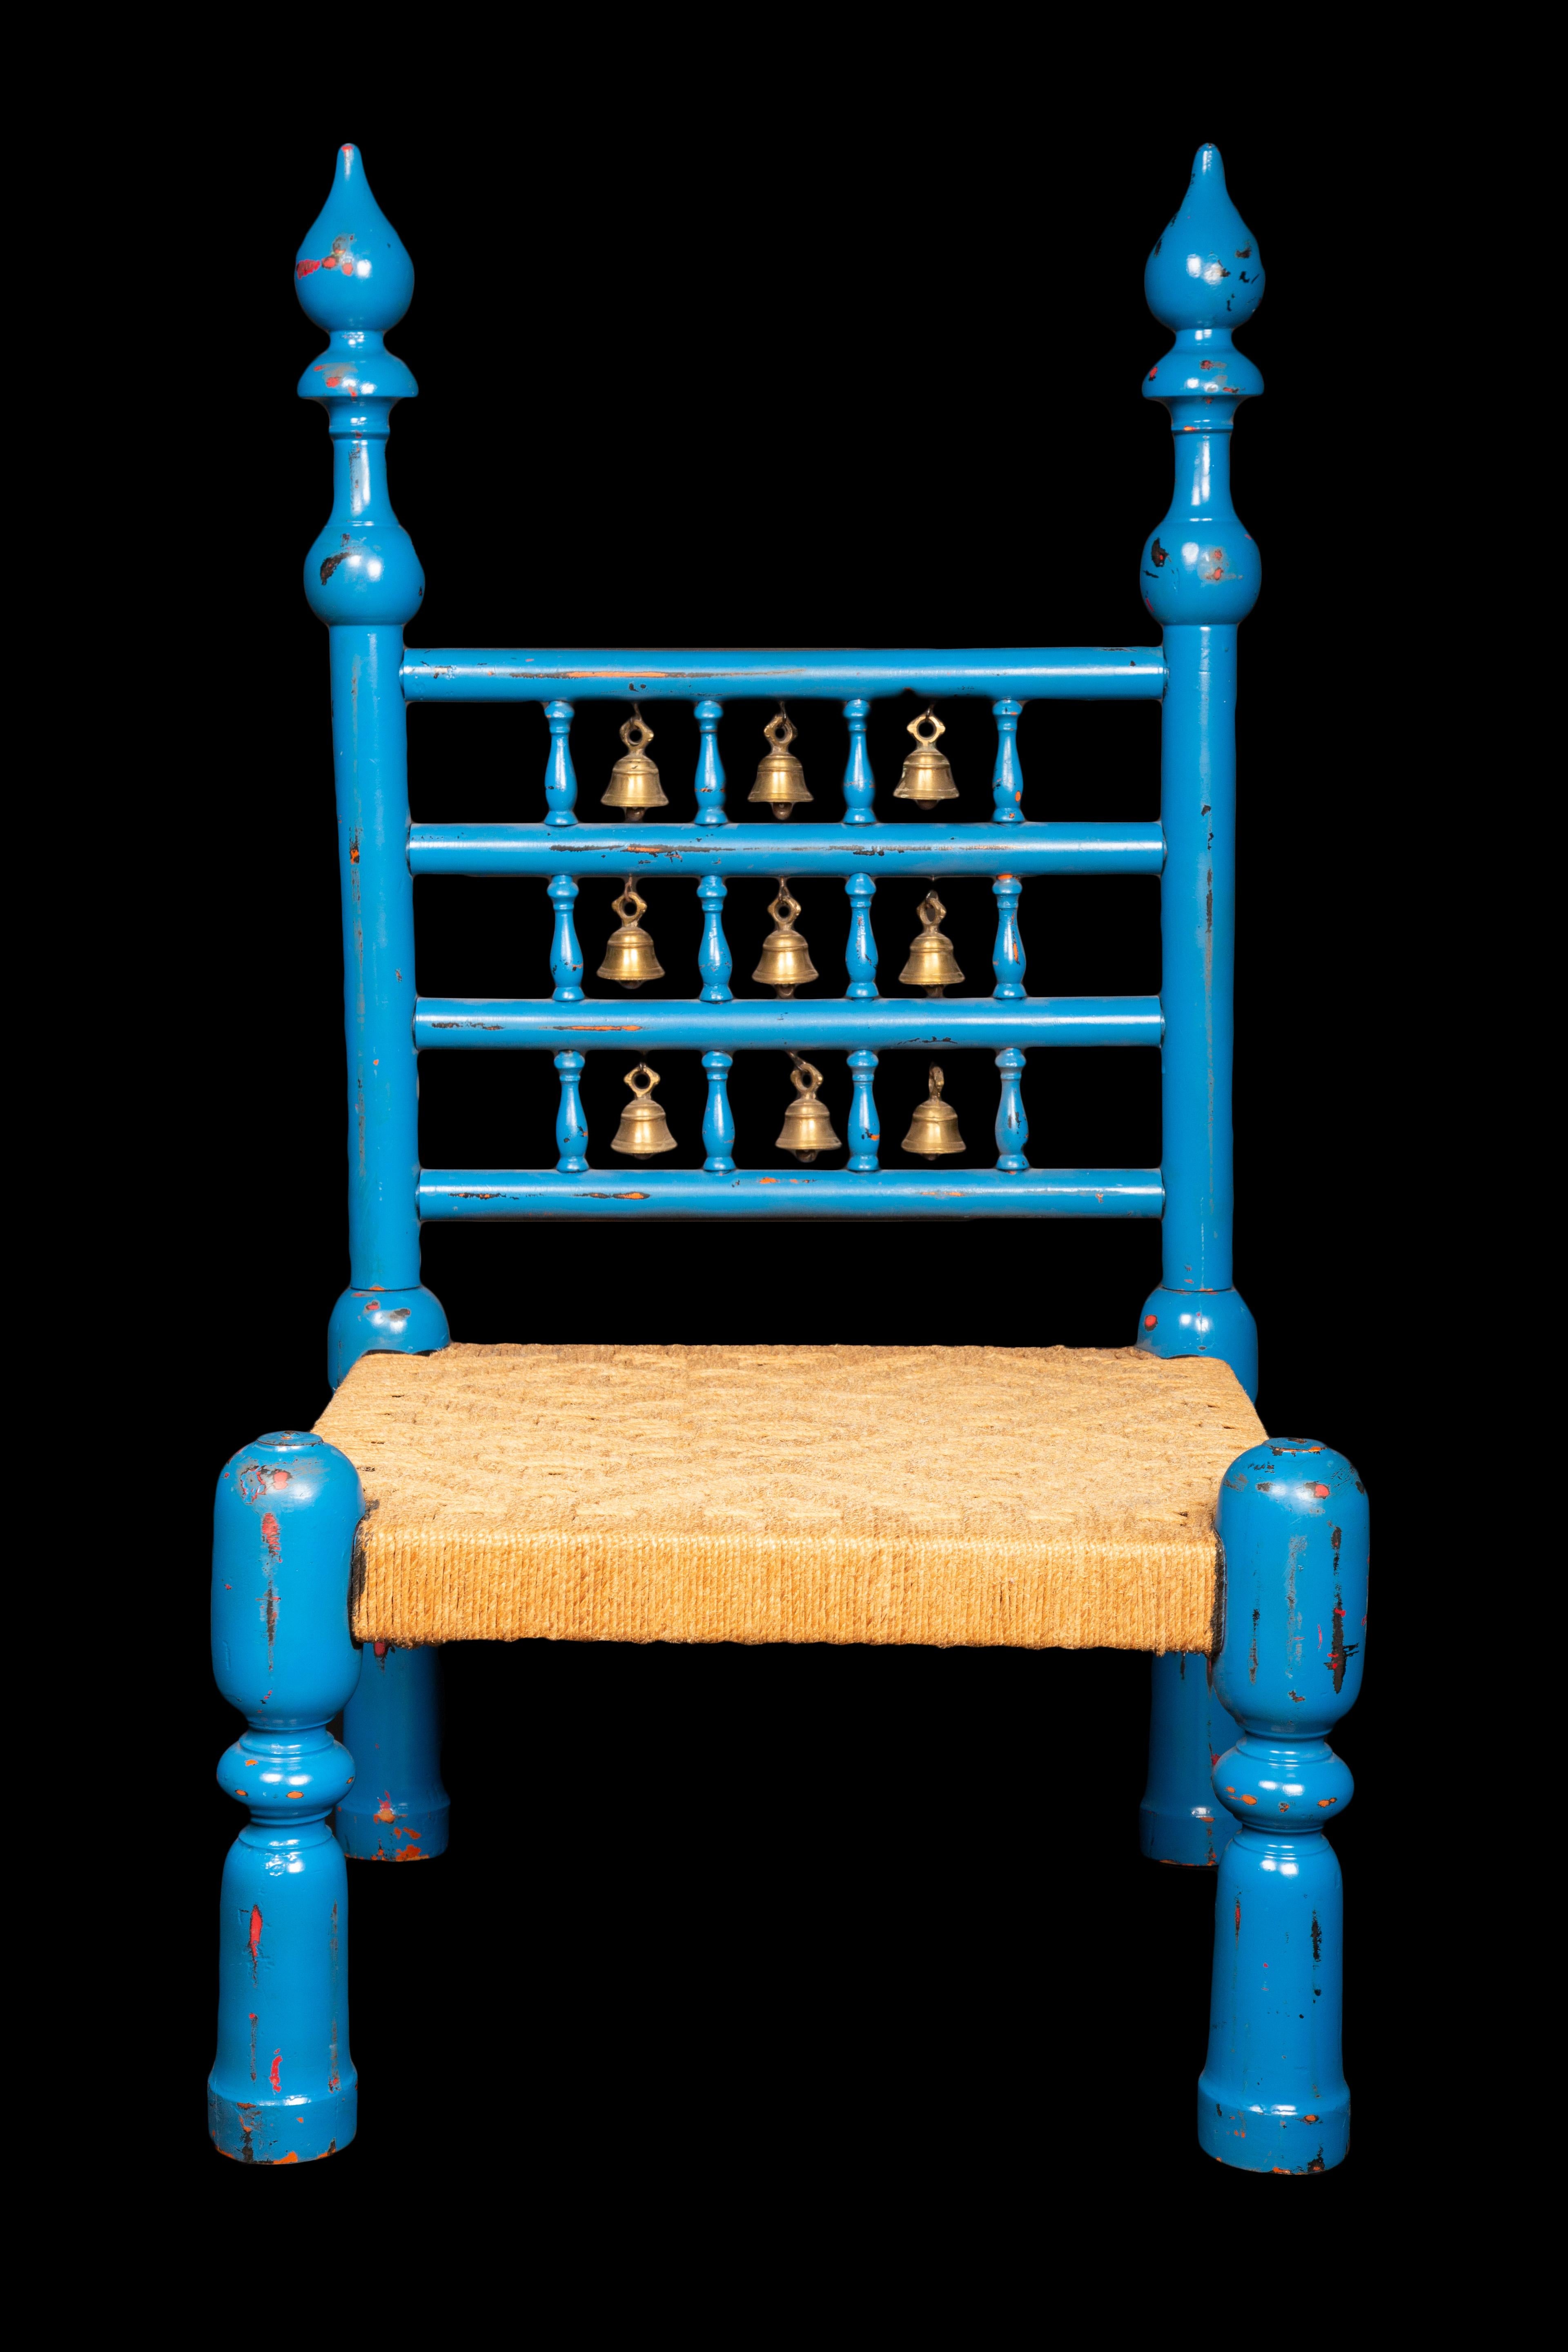 Blue Painted Indian chair with Bells:

Ht: 37